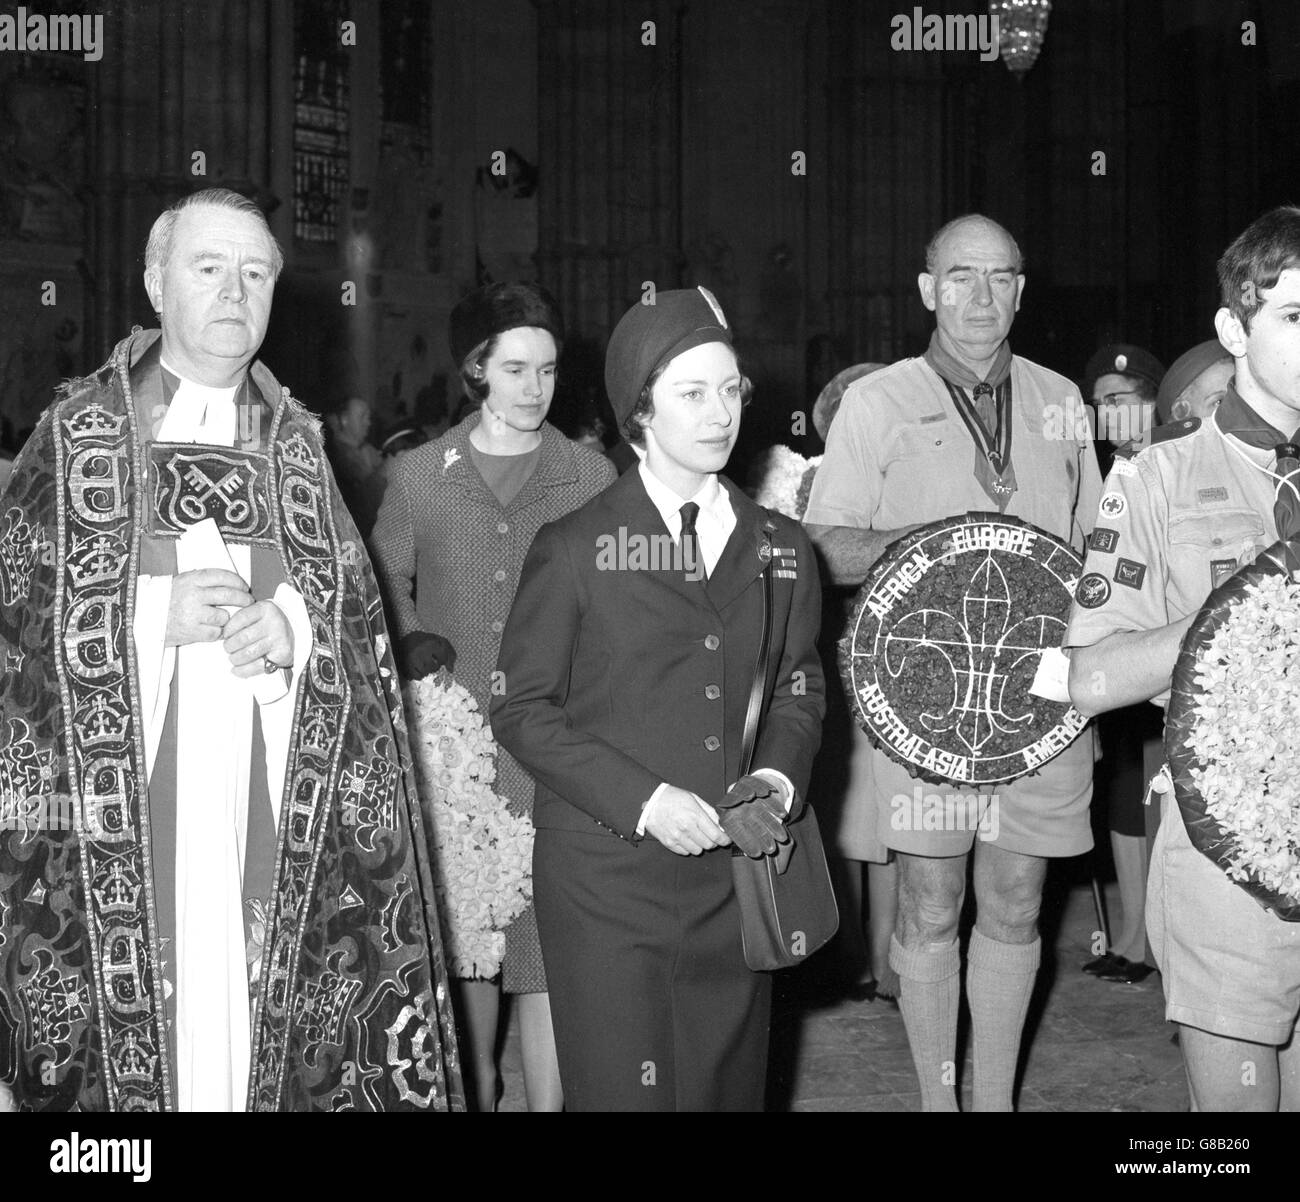 Princess Margaret, as President of the Girl Guide Association, pictured with the Dean of Westminster the Very Reverend Eric Abbott, at Westminster Abbey. Wreaths were placed on the Memorial Stone of Robert Baden-Powell, Founder of the Scout and Guide Movement, during a special service of thanksgiving and dedication, held close to the birthday of Baden-Powell (Feb 22nd). The service was also part of the Abbey's 900th anniversary celebrations. Stock Photo